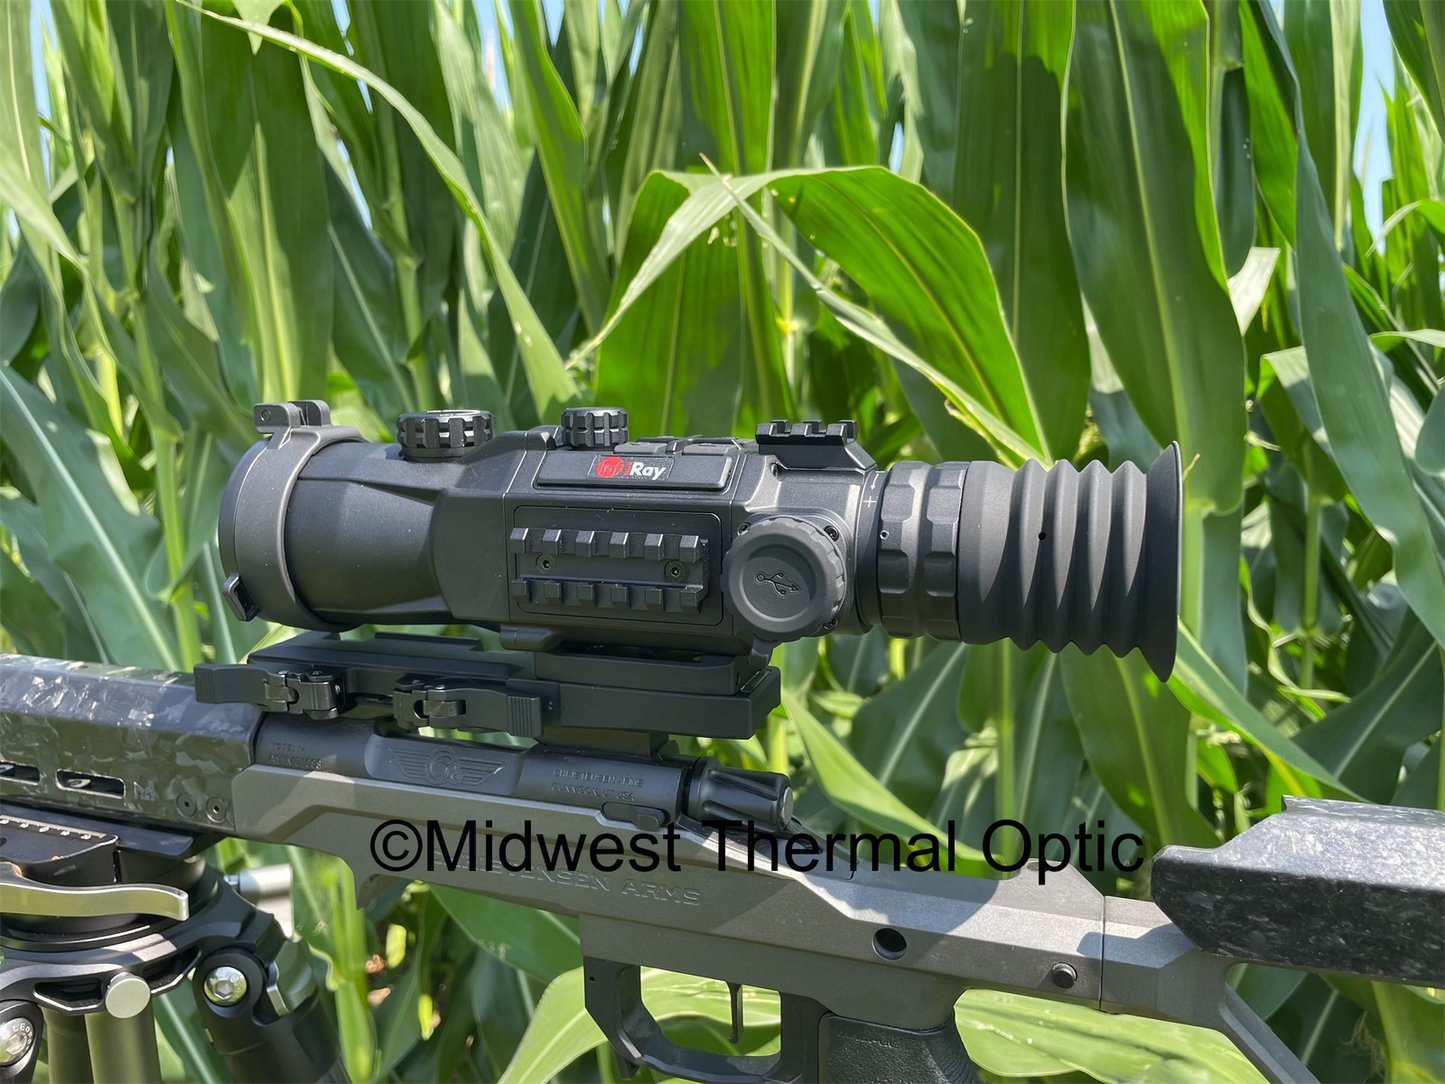 Demo InfiRay Outdoor Rico Hybrid 50 640 Thermal Scope